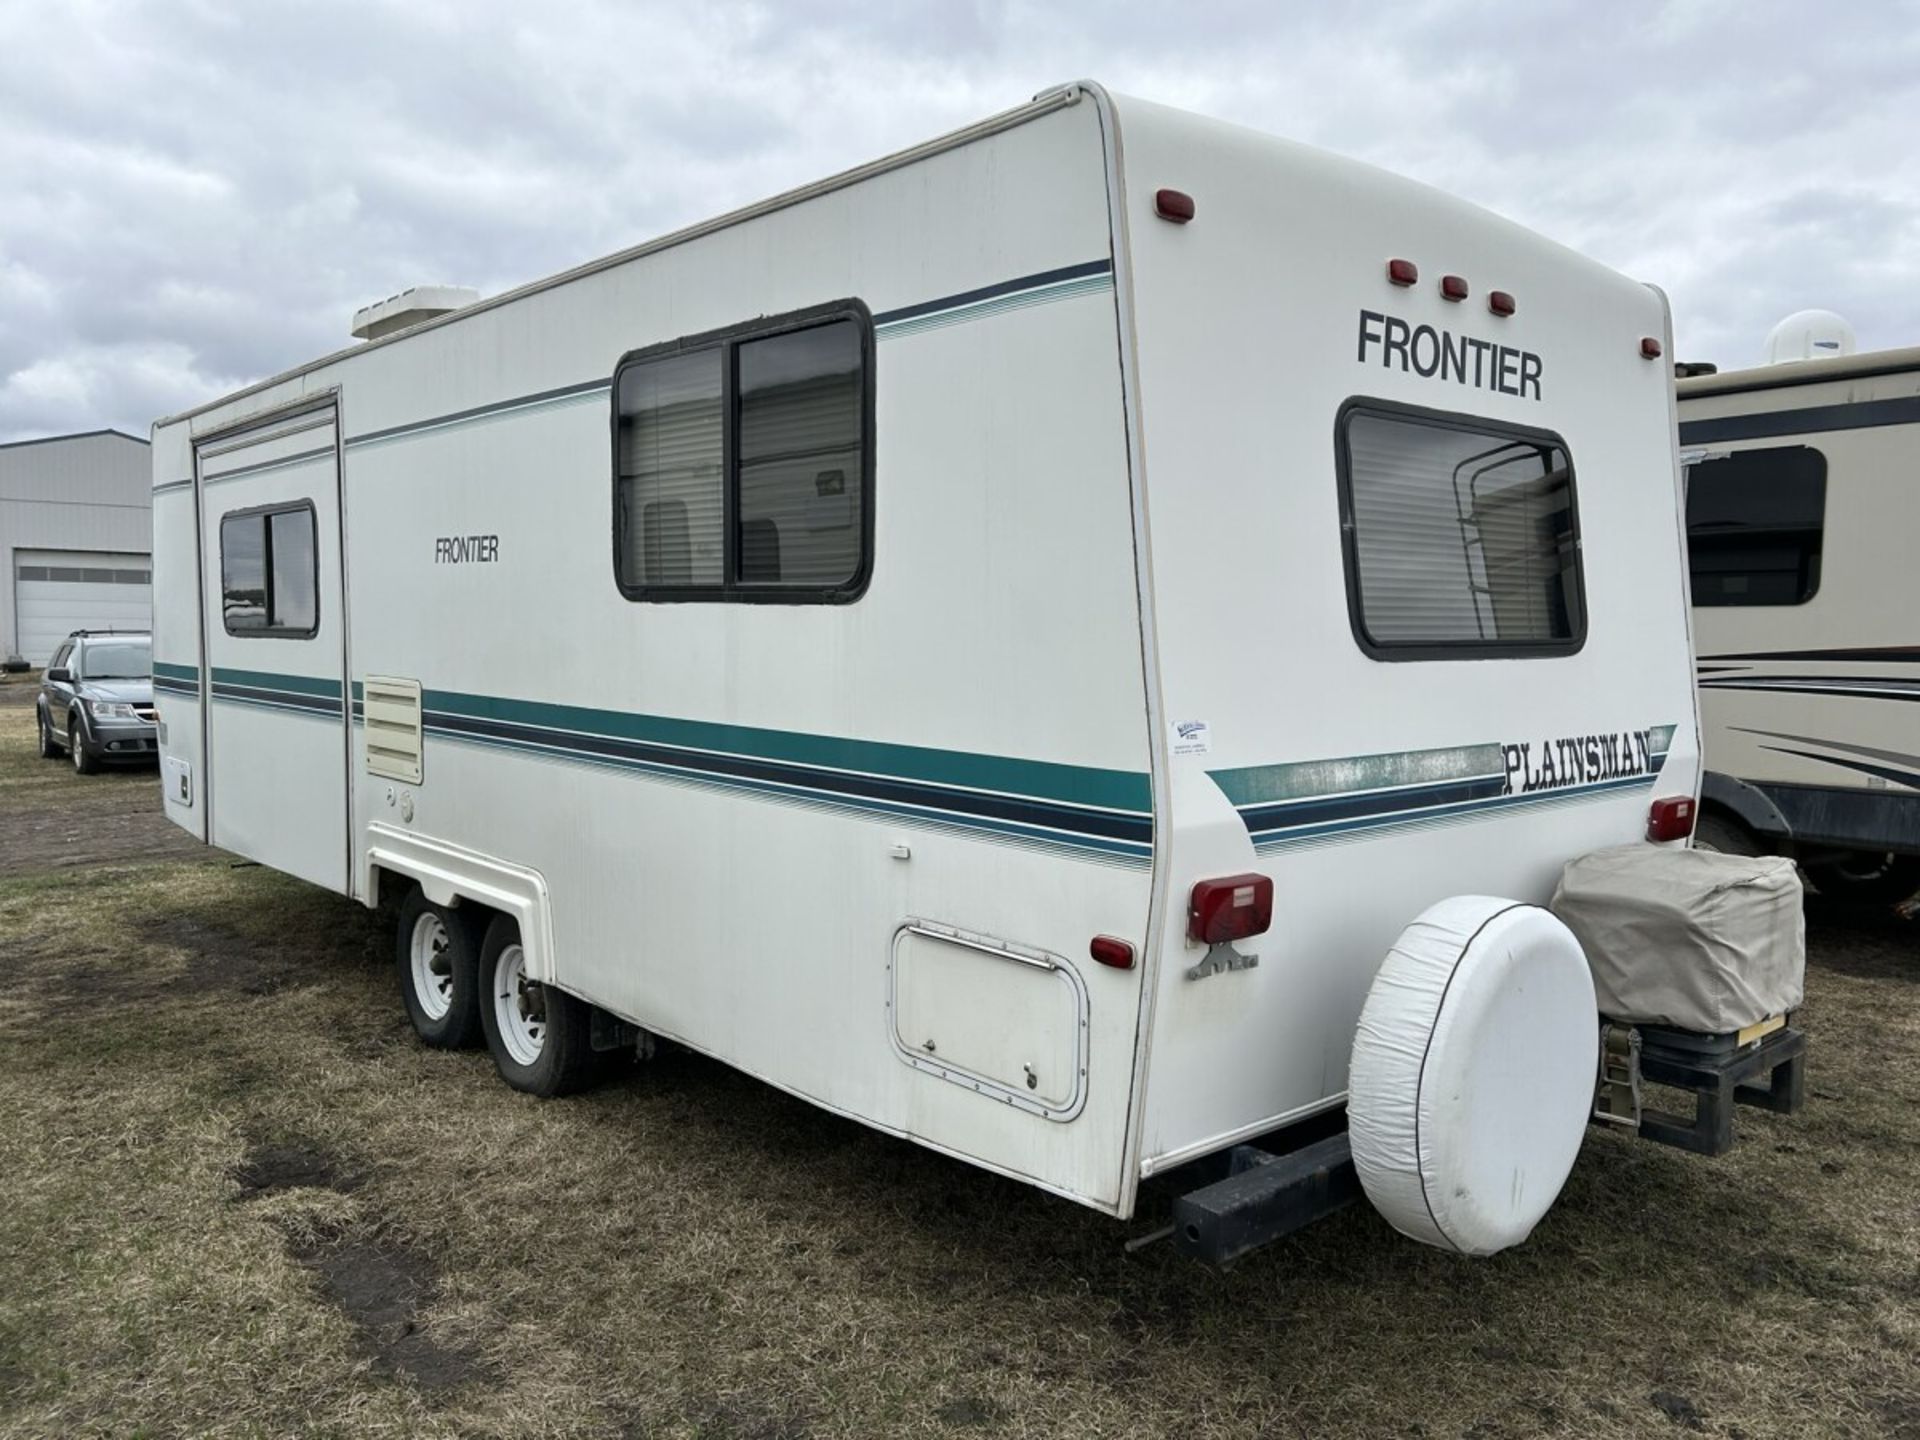 1999 FRONTIER PLAINSMAN T264SL 25 FT HOLIDAY TRAILER, SLIDE OUT, NOTE: CUSTOM STEP SOLD SEPERATELY - Image 3 of 17